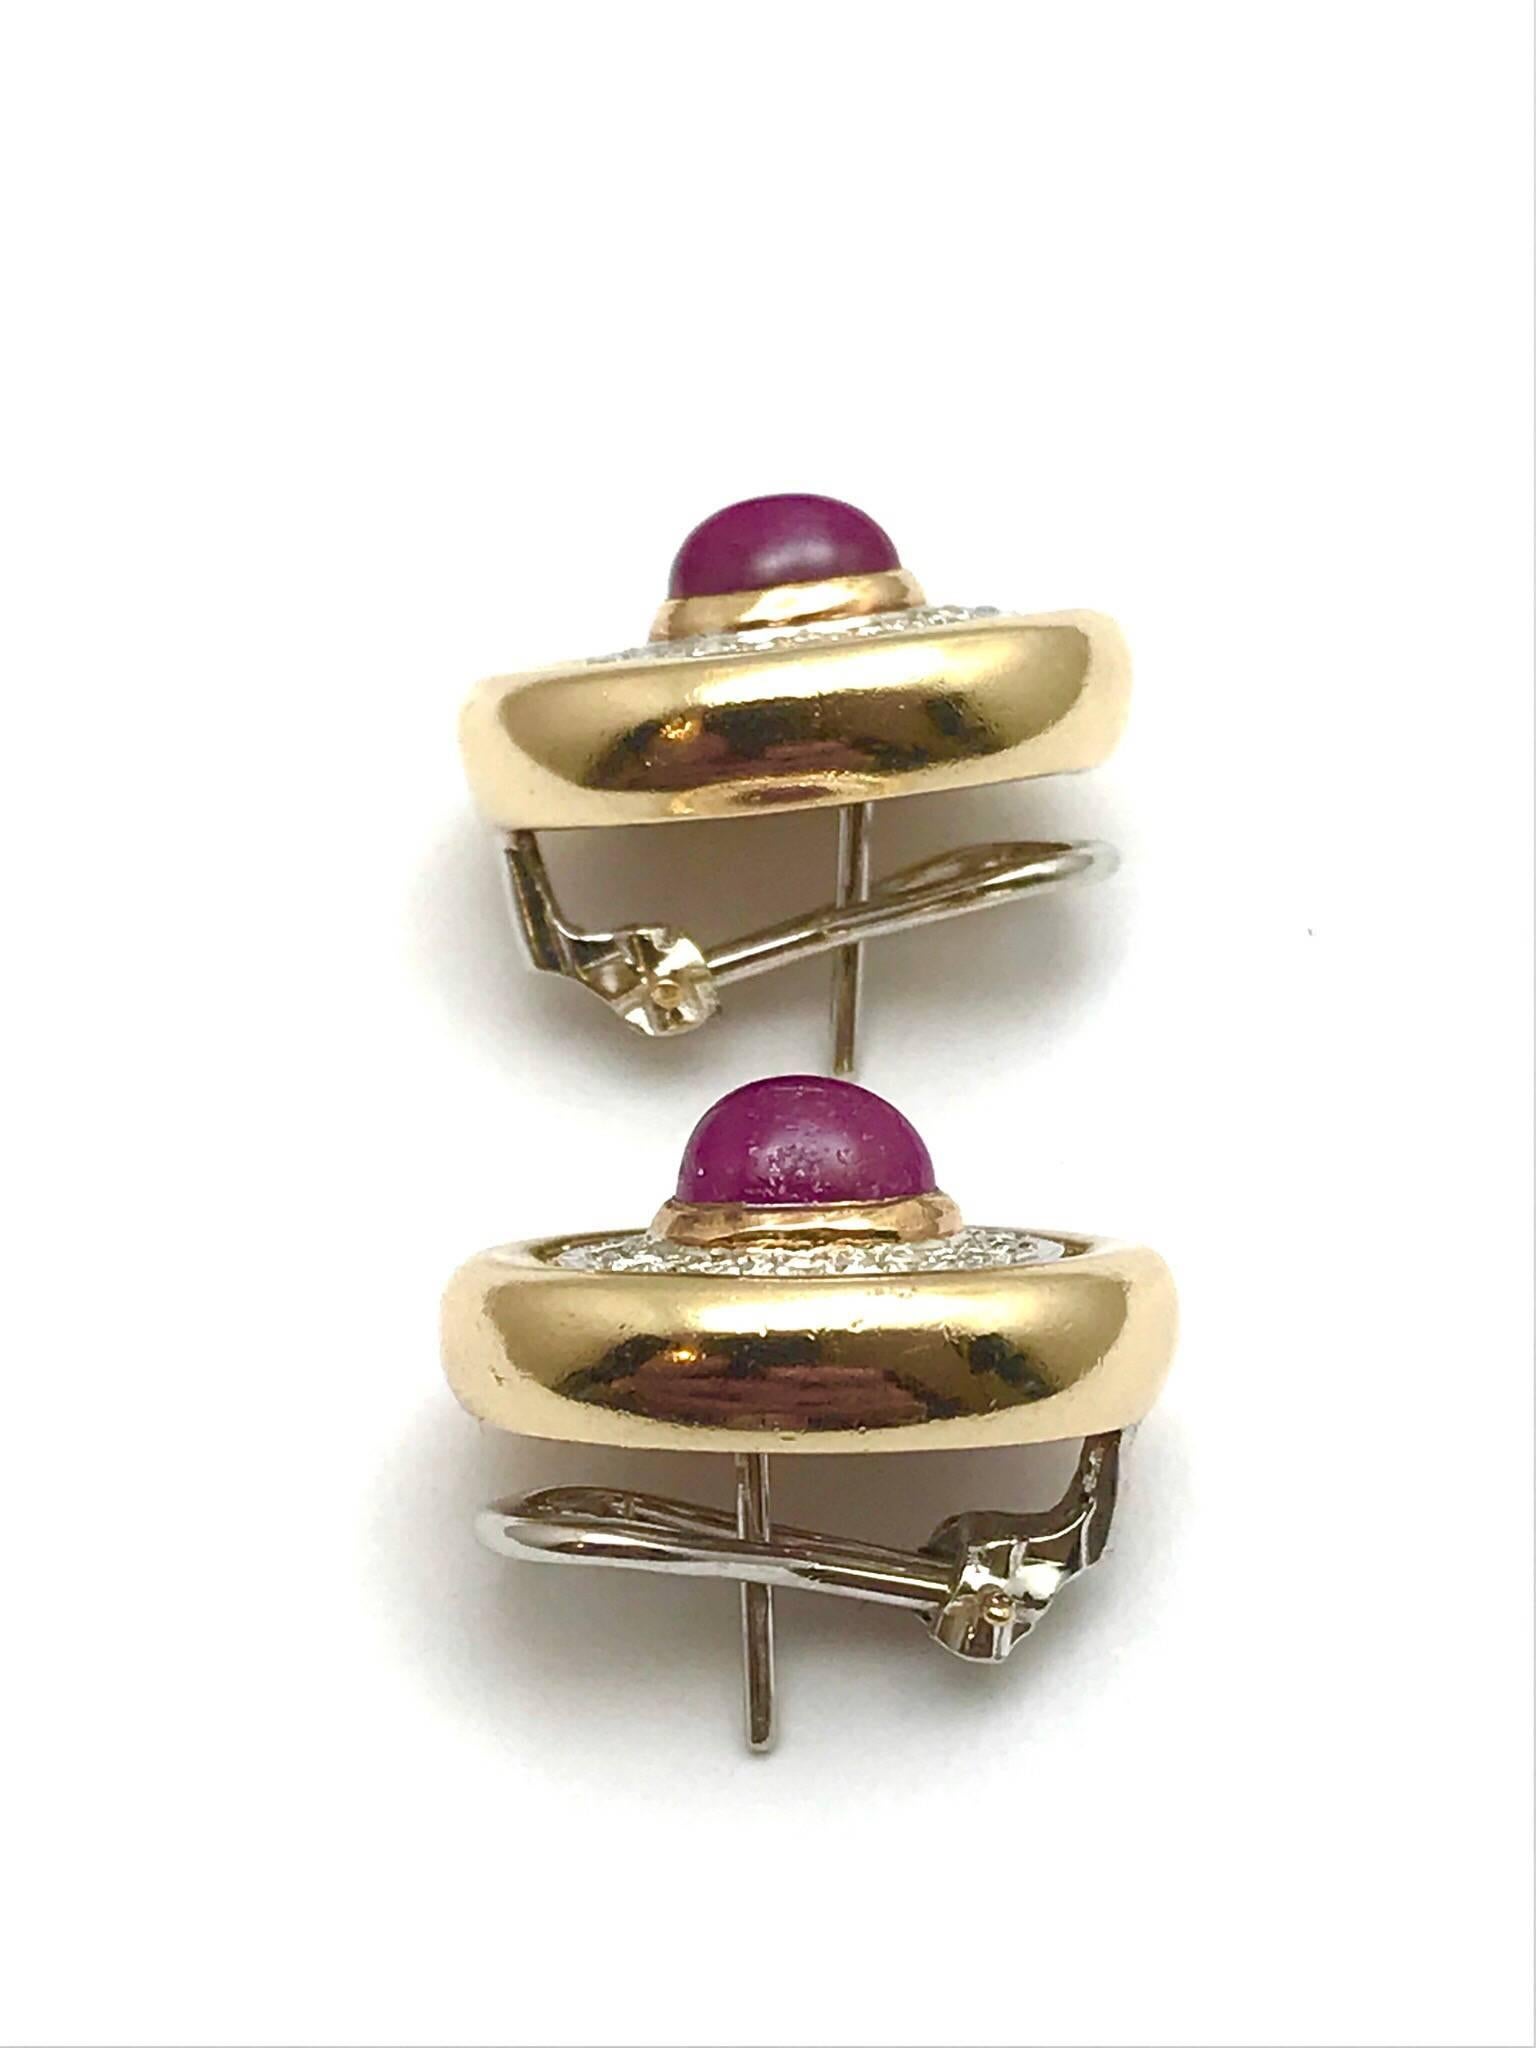 A pair of 3.50 carats cabochon ruby and round diamonds 14 karat white and yellow gold clip and post earrings.  The rubies are bezel set in yellow gold, with a single row of round diamonds in white gold surrounding, framed in by a yellow gold border.